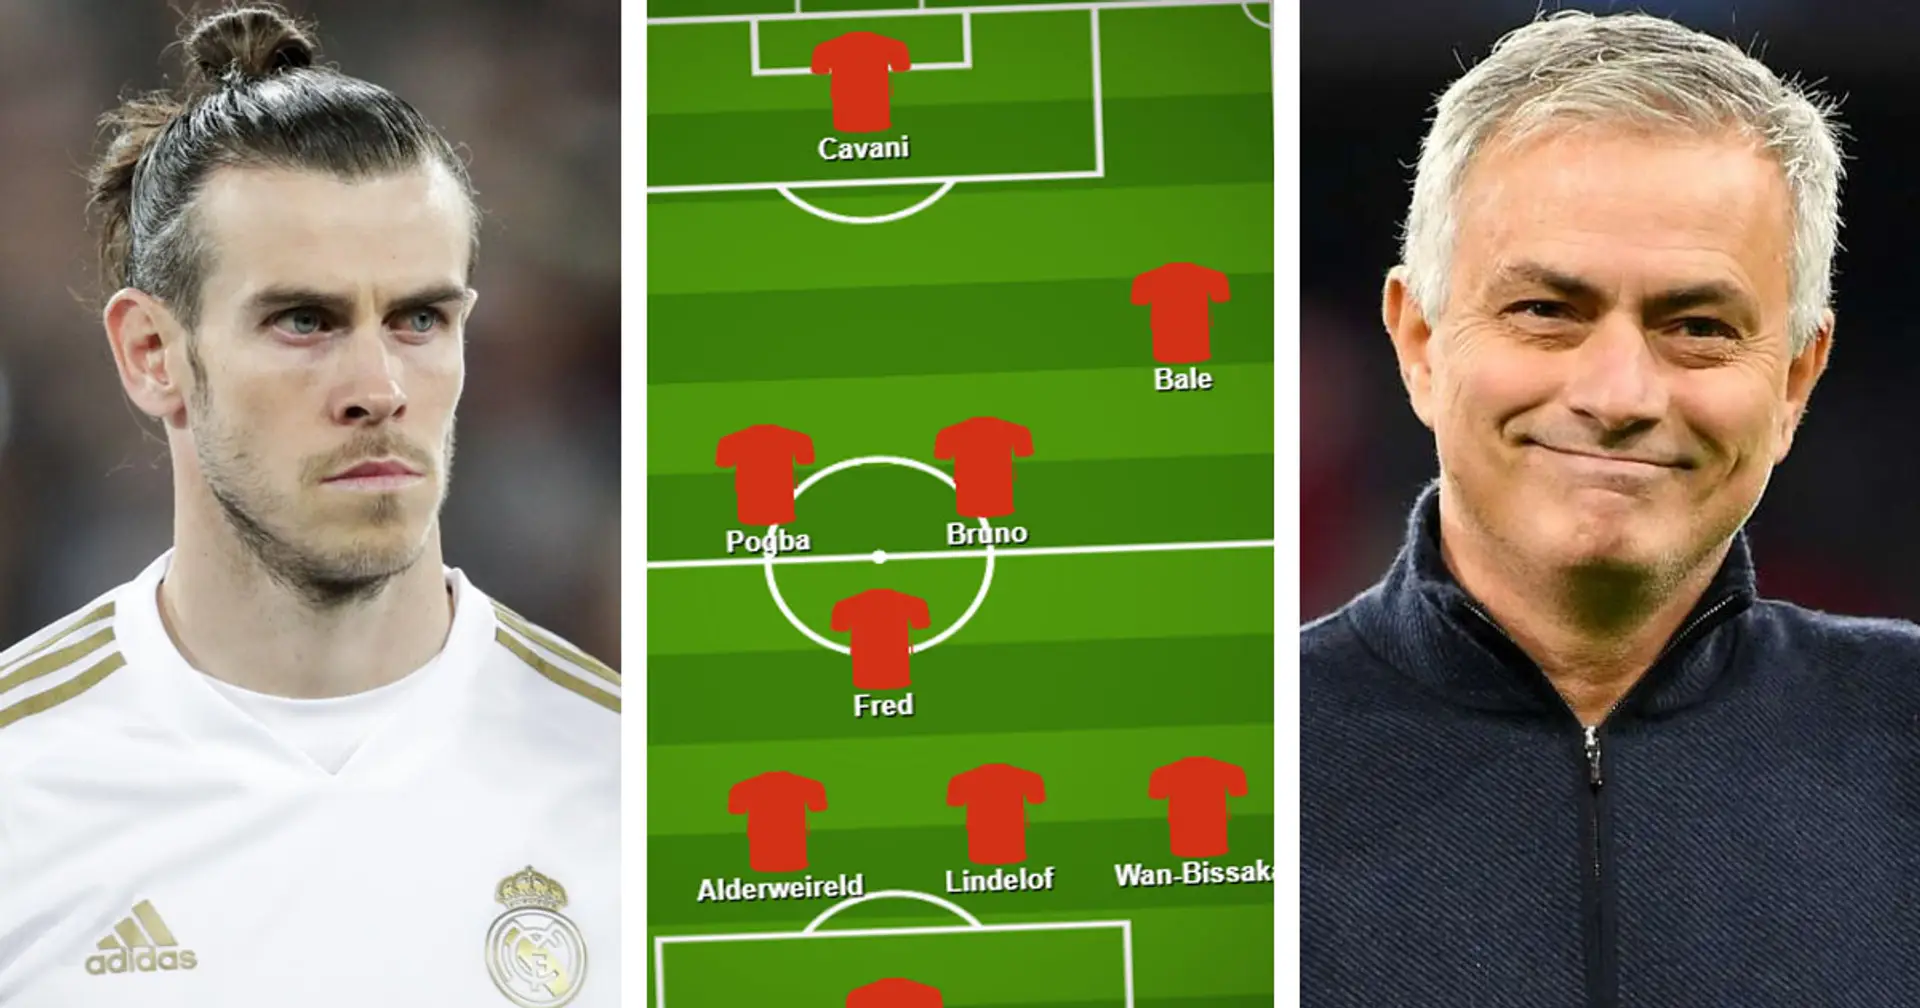 Bale, Alderweireld & more: What United's starting XI could have looked like now if Mourinho got all his desired transfers in 2018